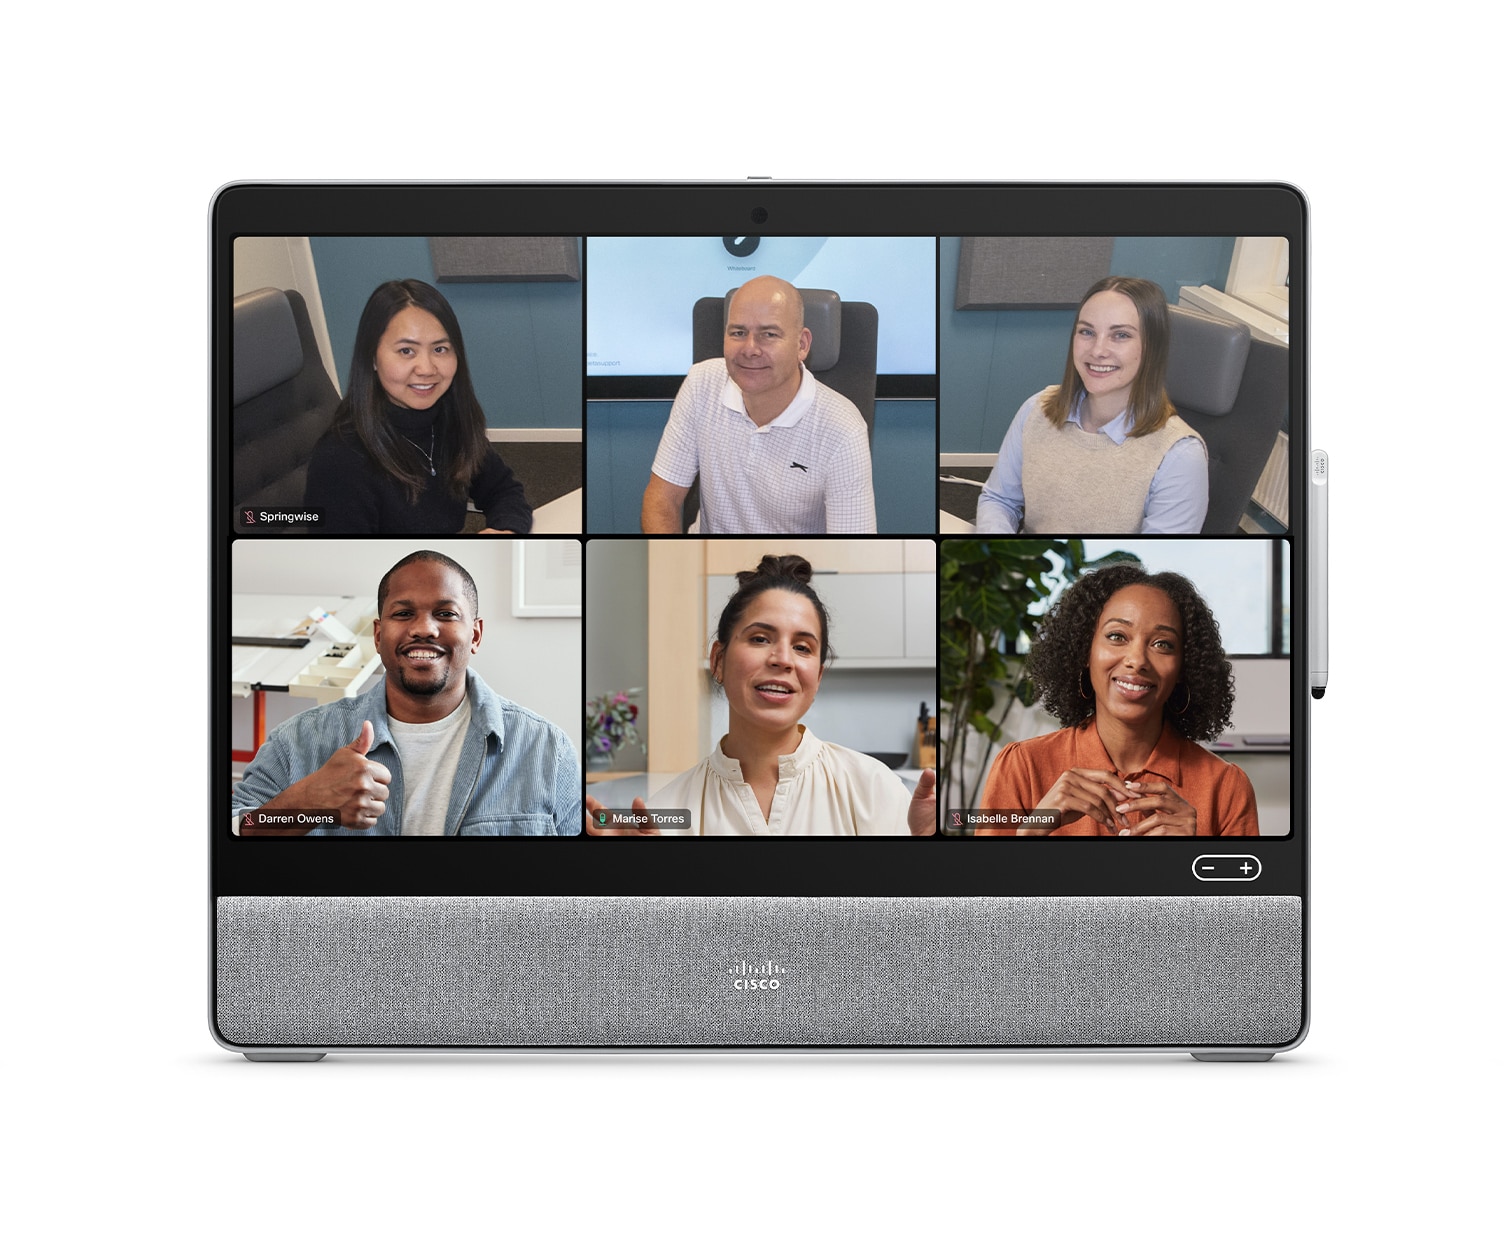 Frames and People Focus view on Cisco Desk device with Webex meeting platform selected for video conference.